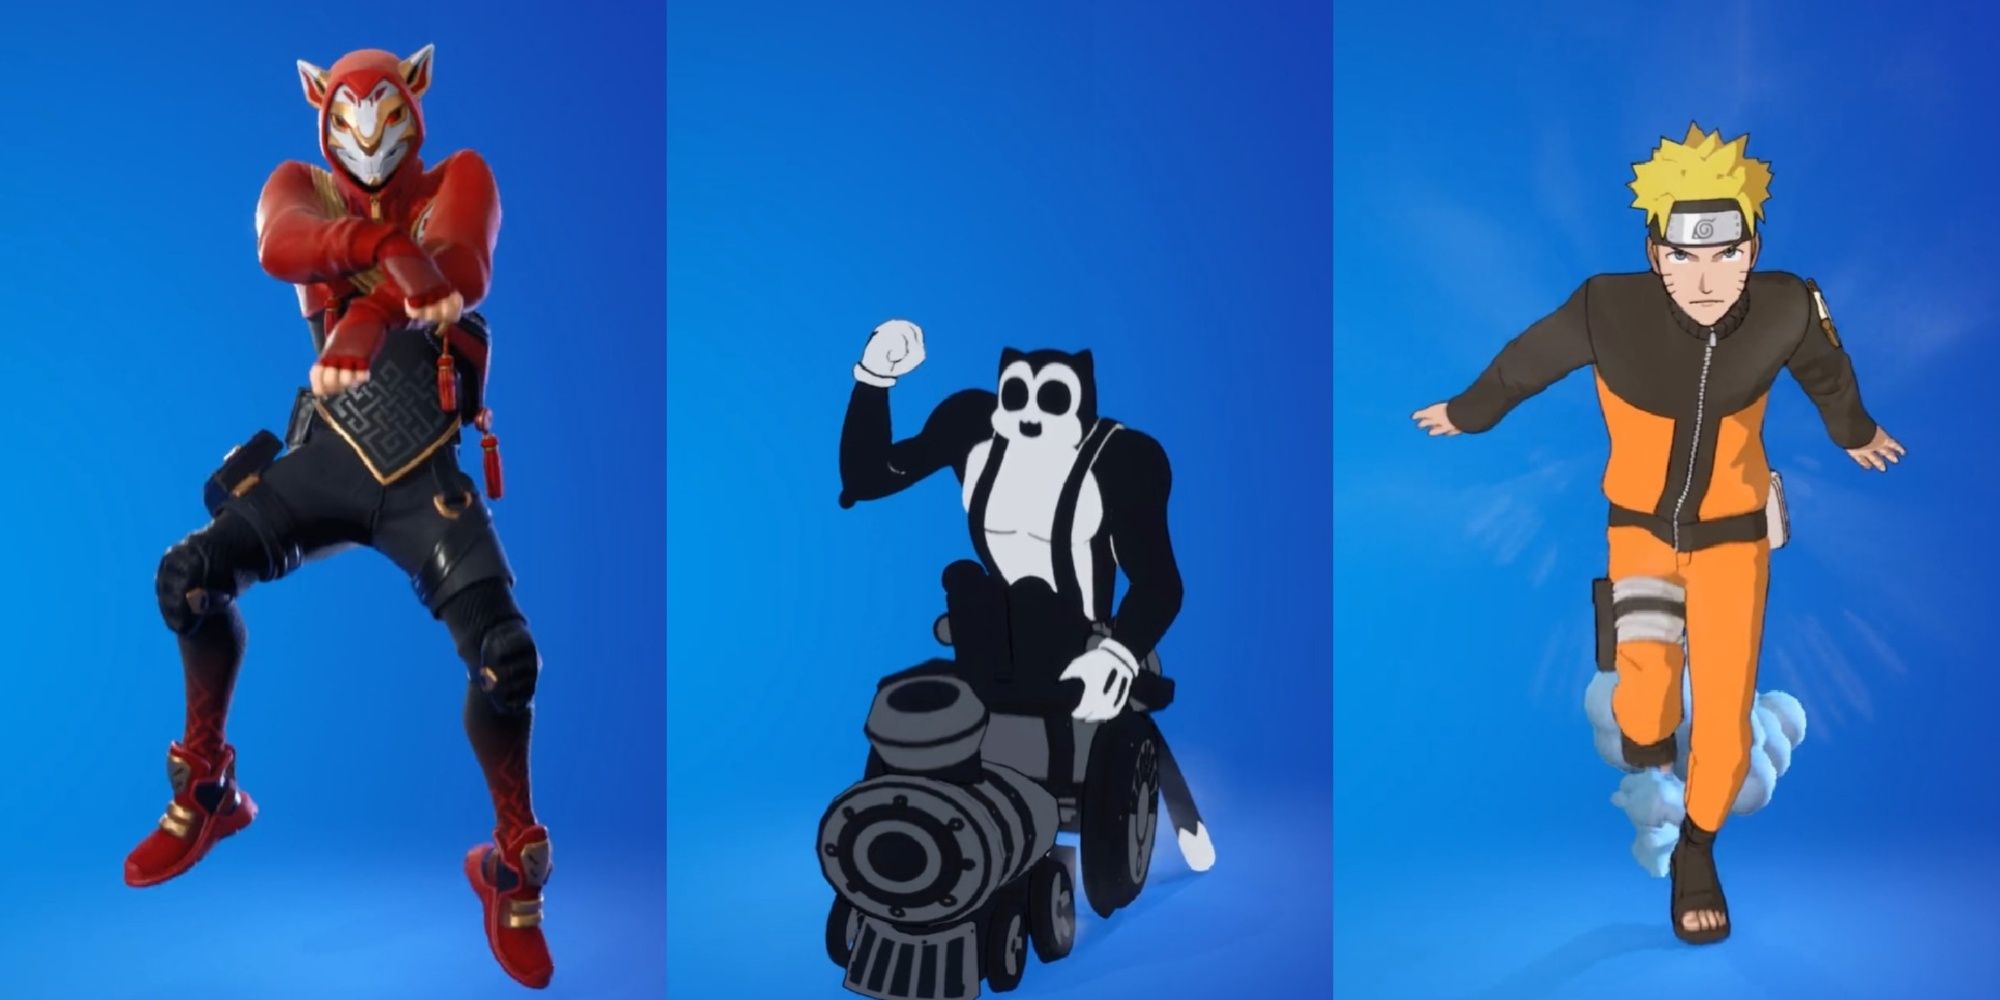 An image from Fortnite of three different Traversal Emotes, called Gangnam Style, Chugga-Chugga, and Full Tilt